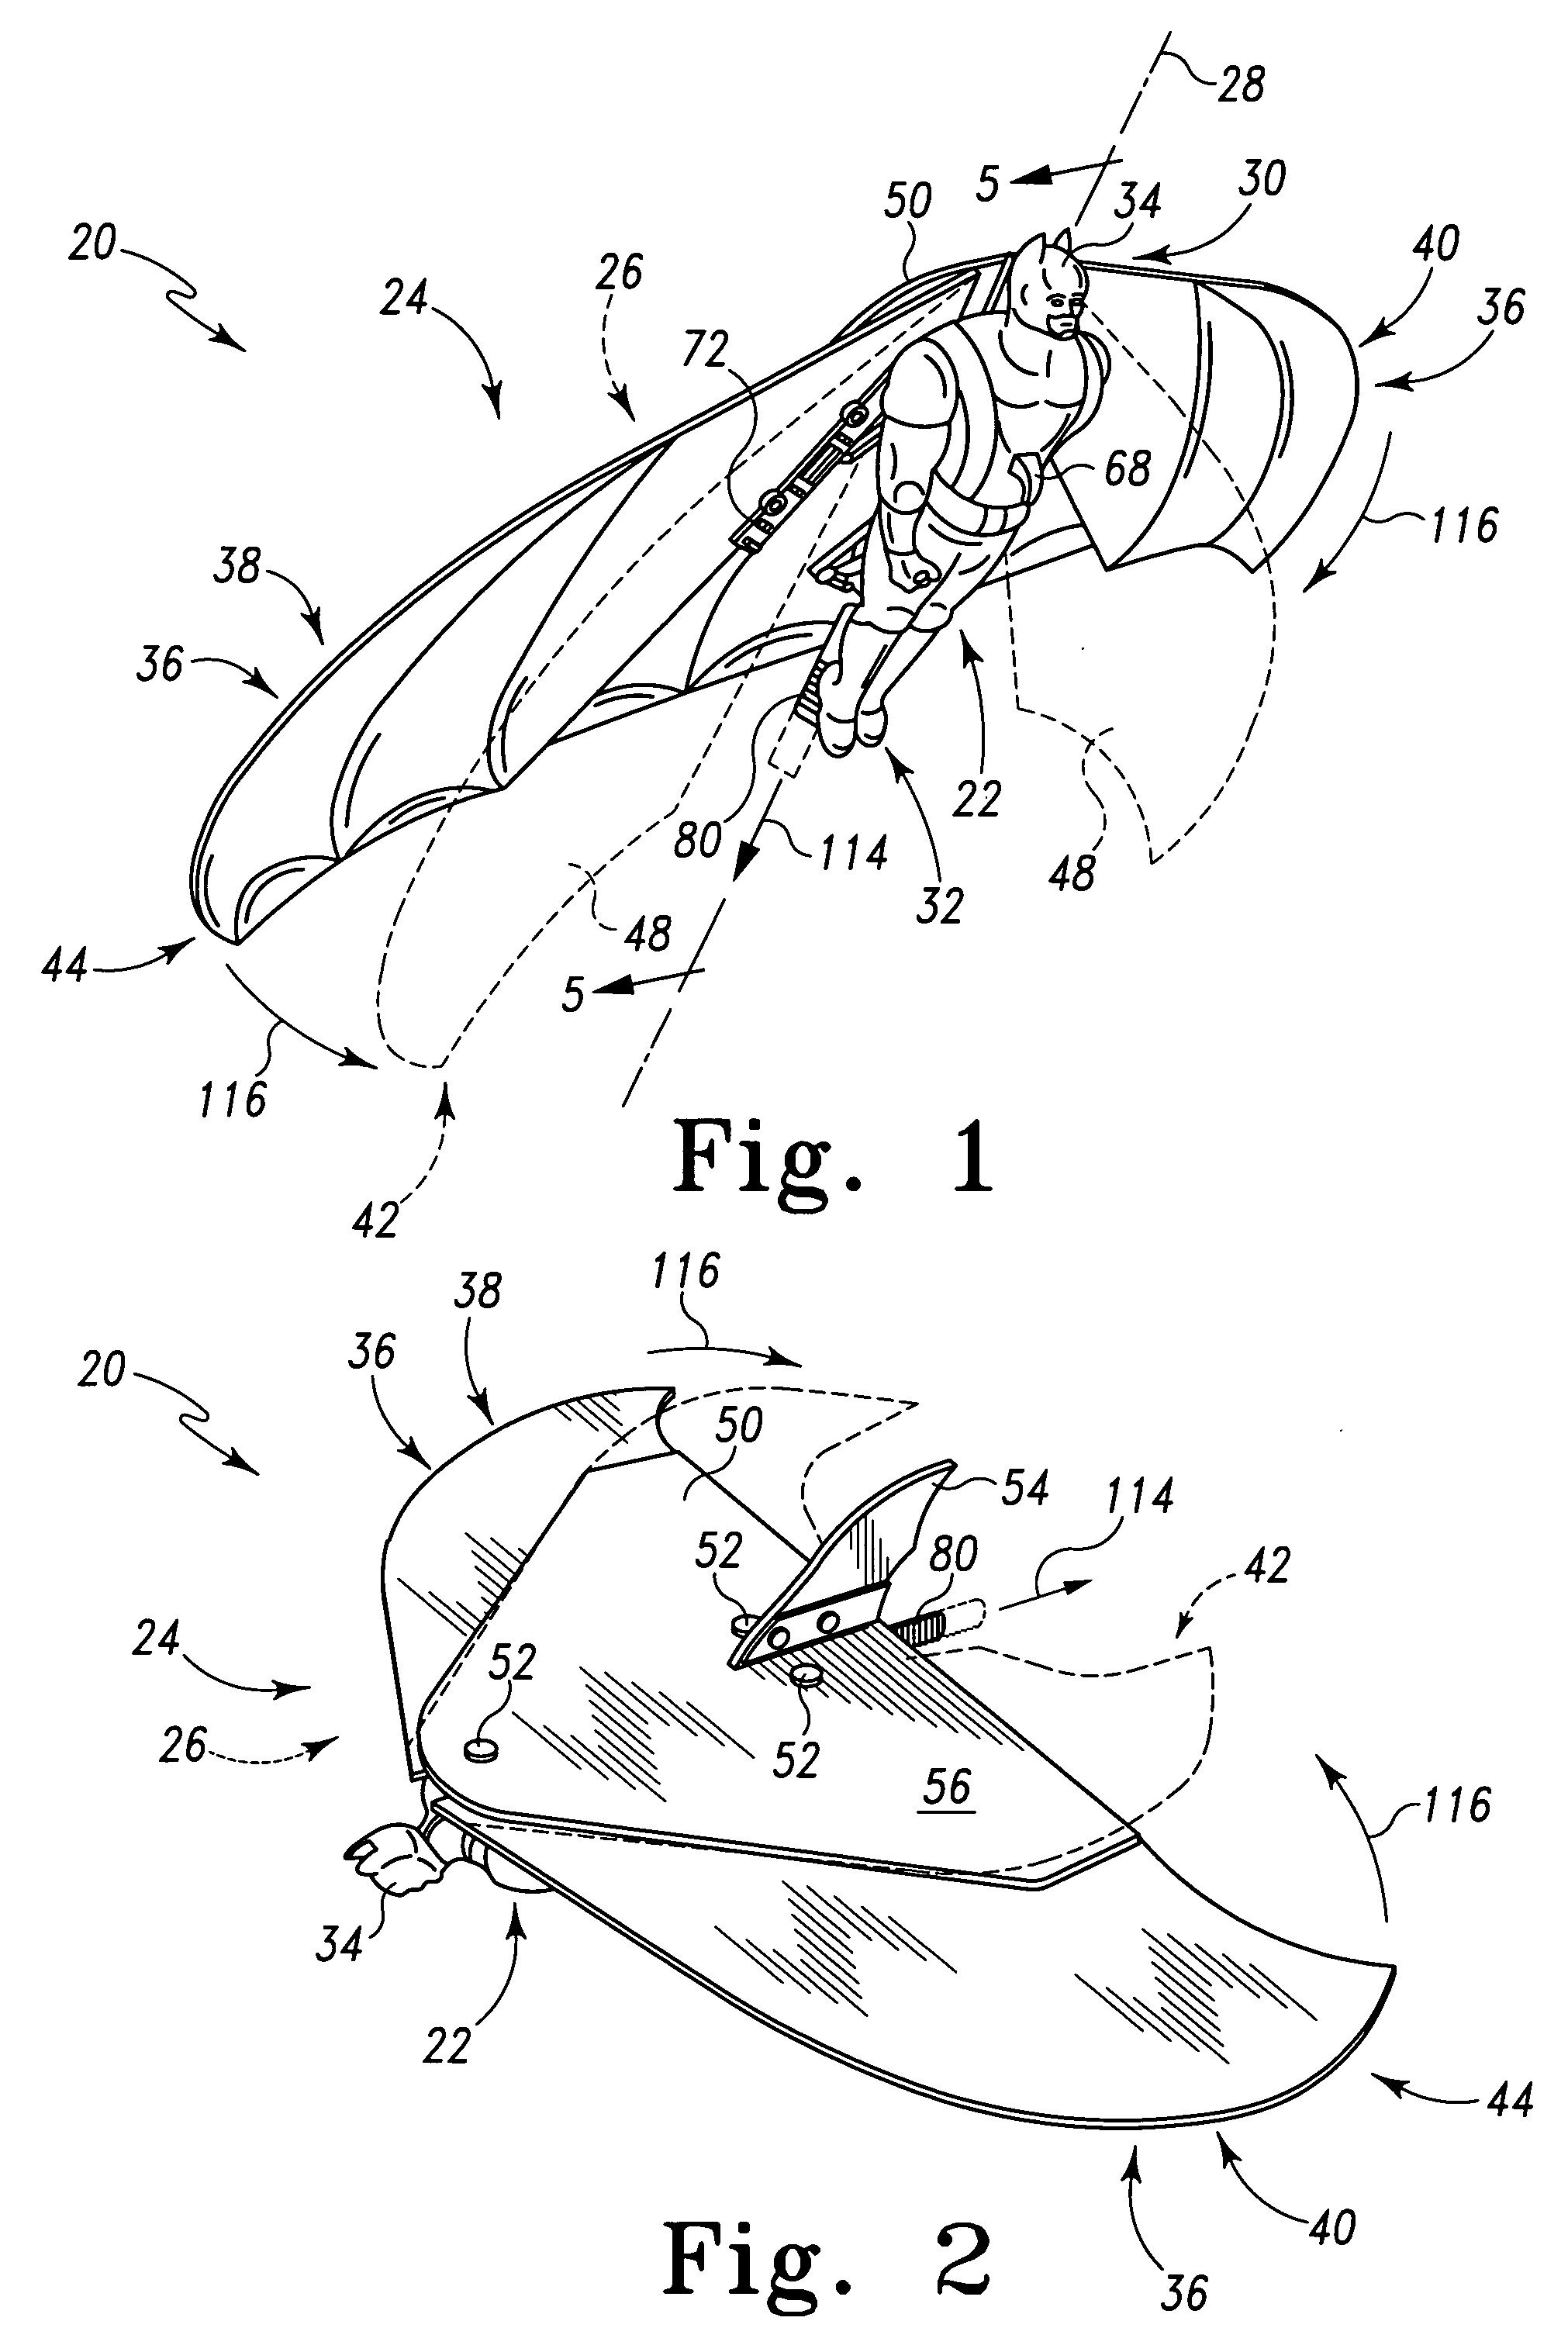 Flying toy with extending wings